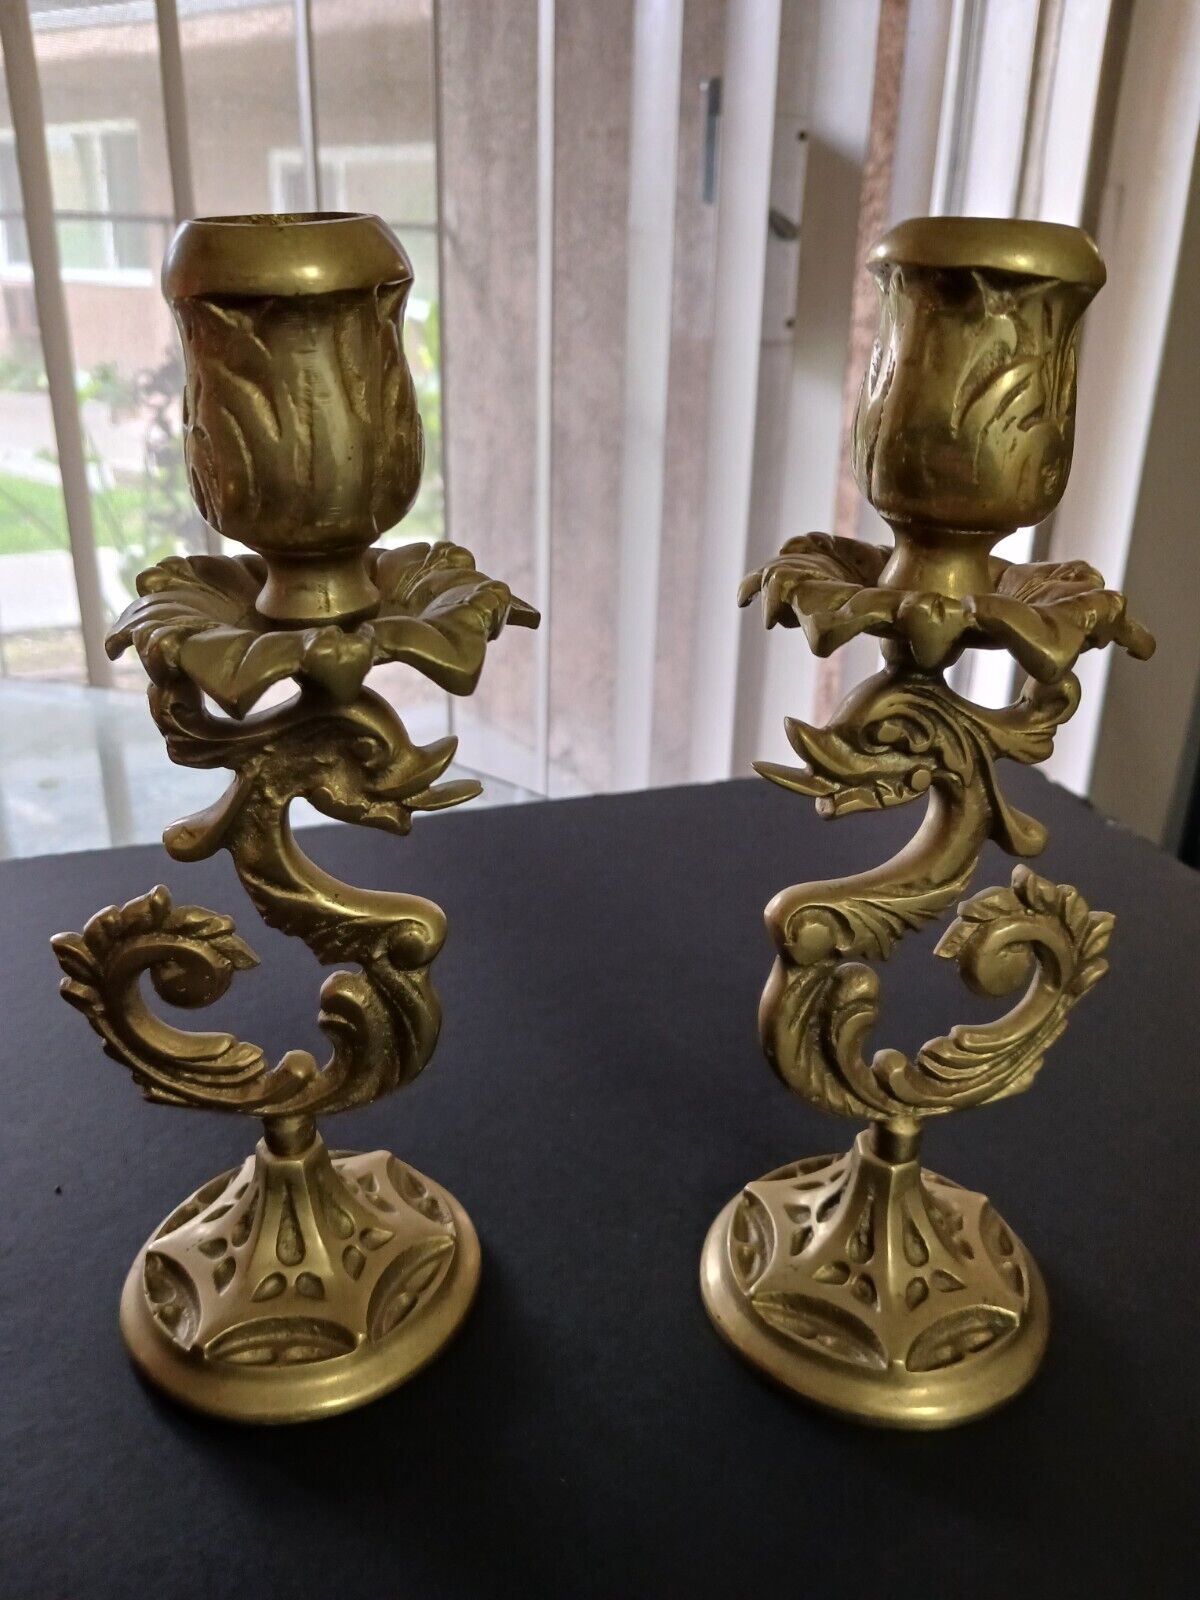 Antique 19c Brass Decorative Art Candlesticks Detailed Pair Candle Holders 1800s